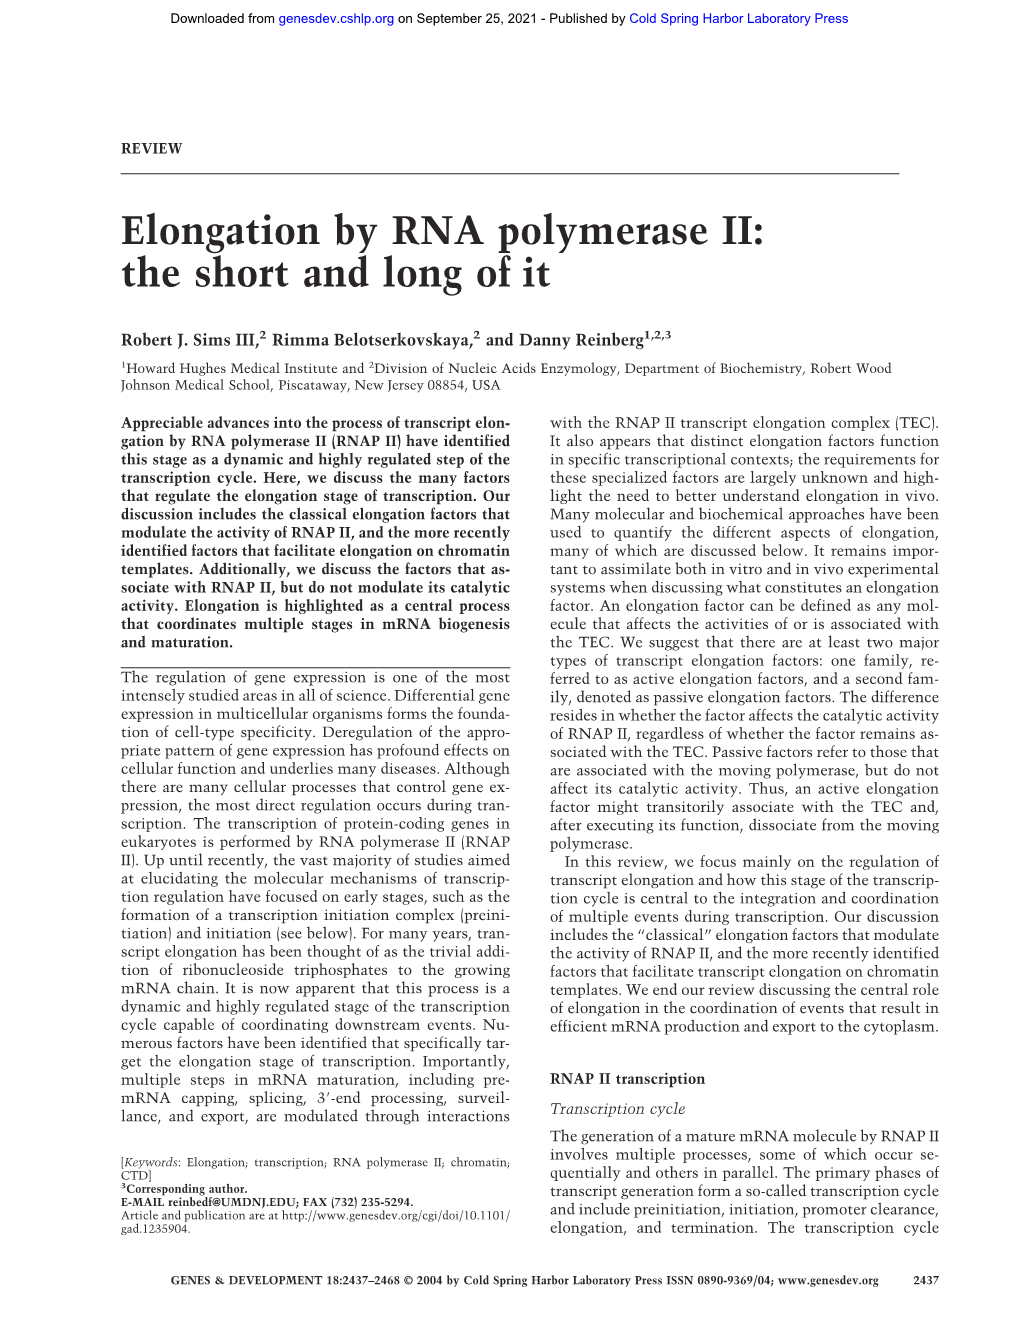 Elongation by RNA Polymerase II: the Short and Long of It